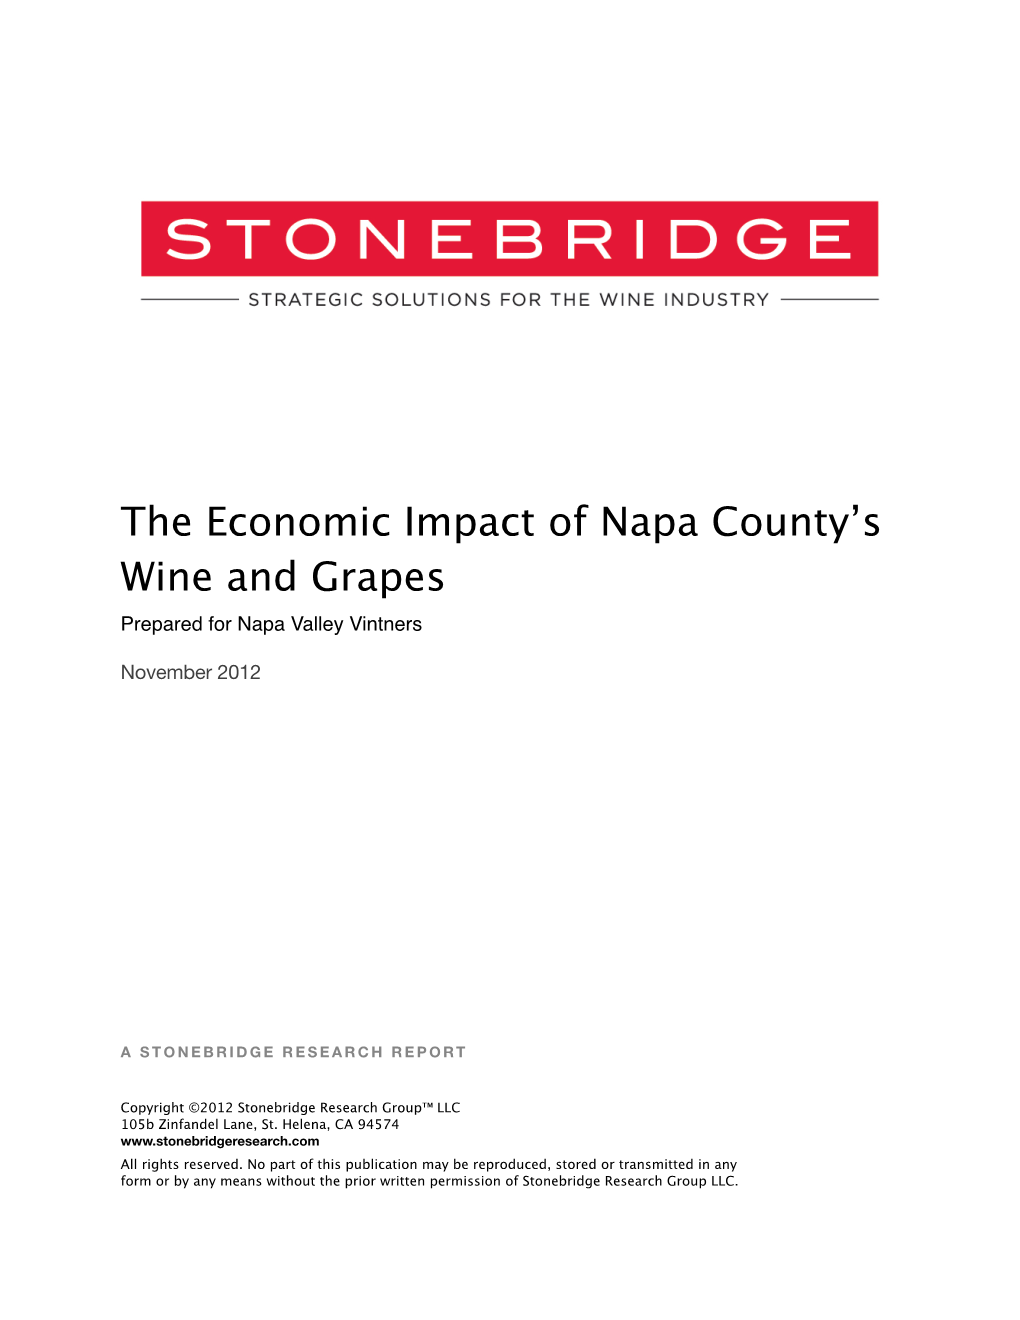 The Economic Impact of Napa County's Wine and Grapes